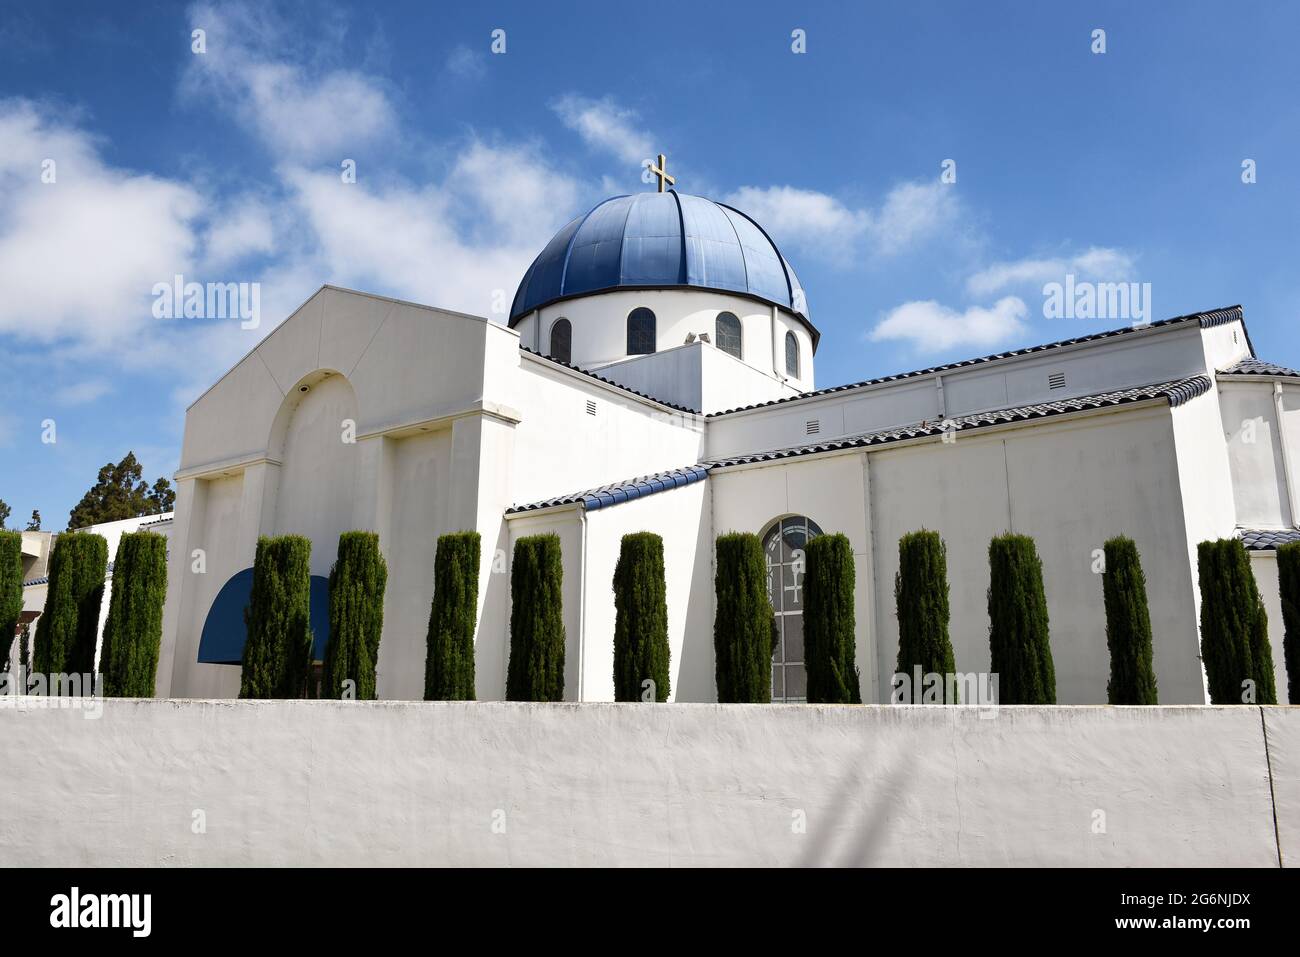 LONG BEACH, CALIFORNIA - 5 JULY 2021: The Assumption of the Blessed Virgin Mary Greek Orthodox Church. Stock Photo